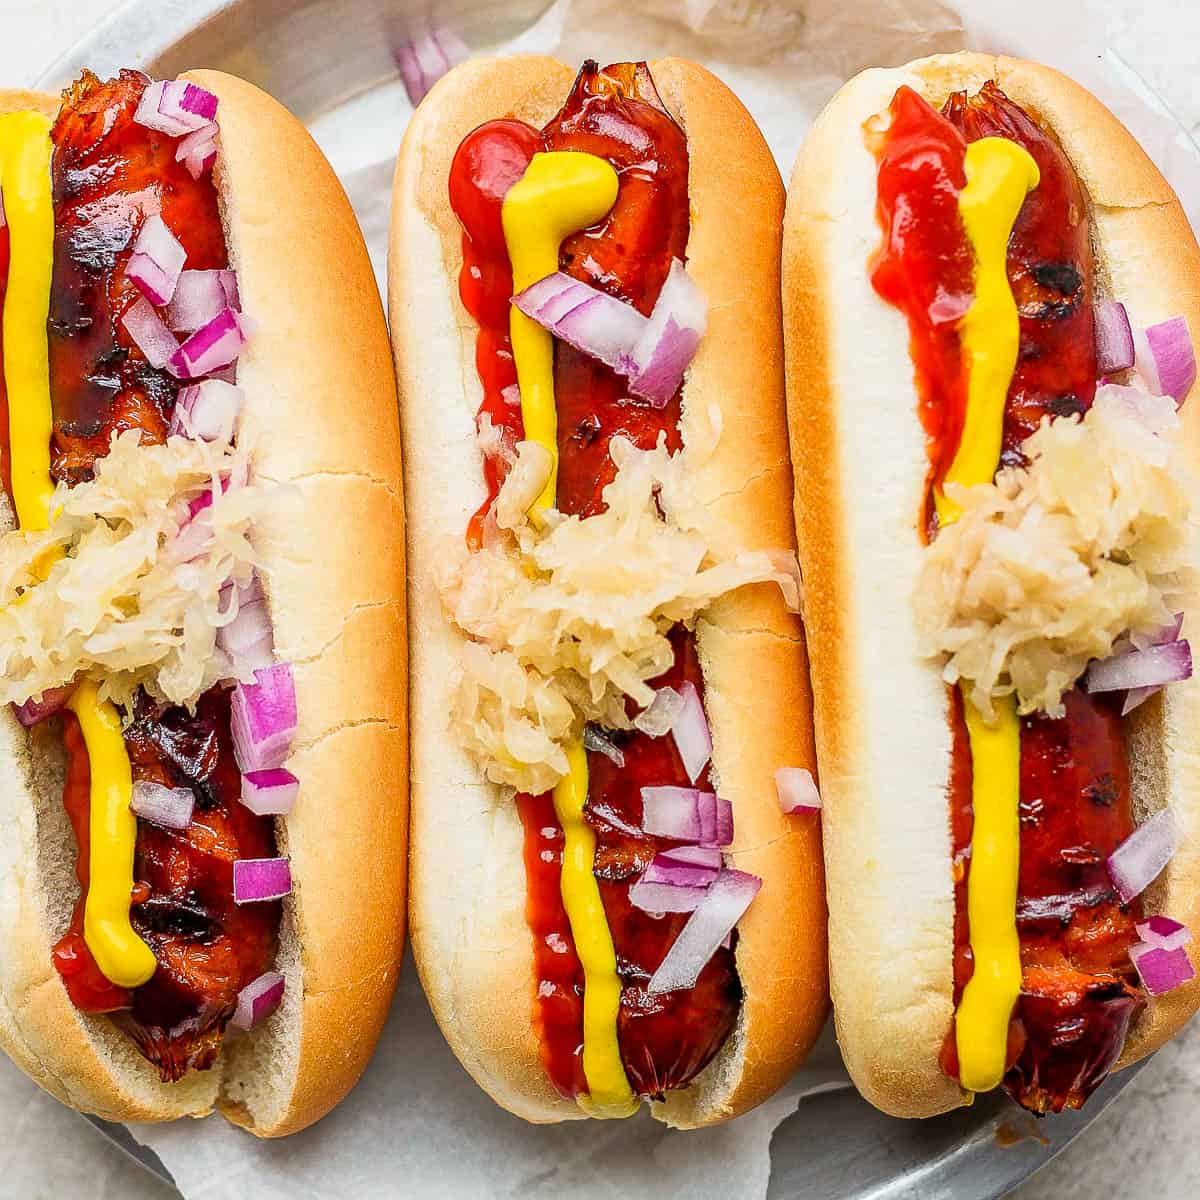 Grilled Hot Dogs (how to grill hot dogs) - The Wooden Skillet